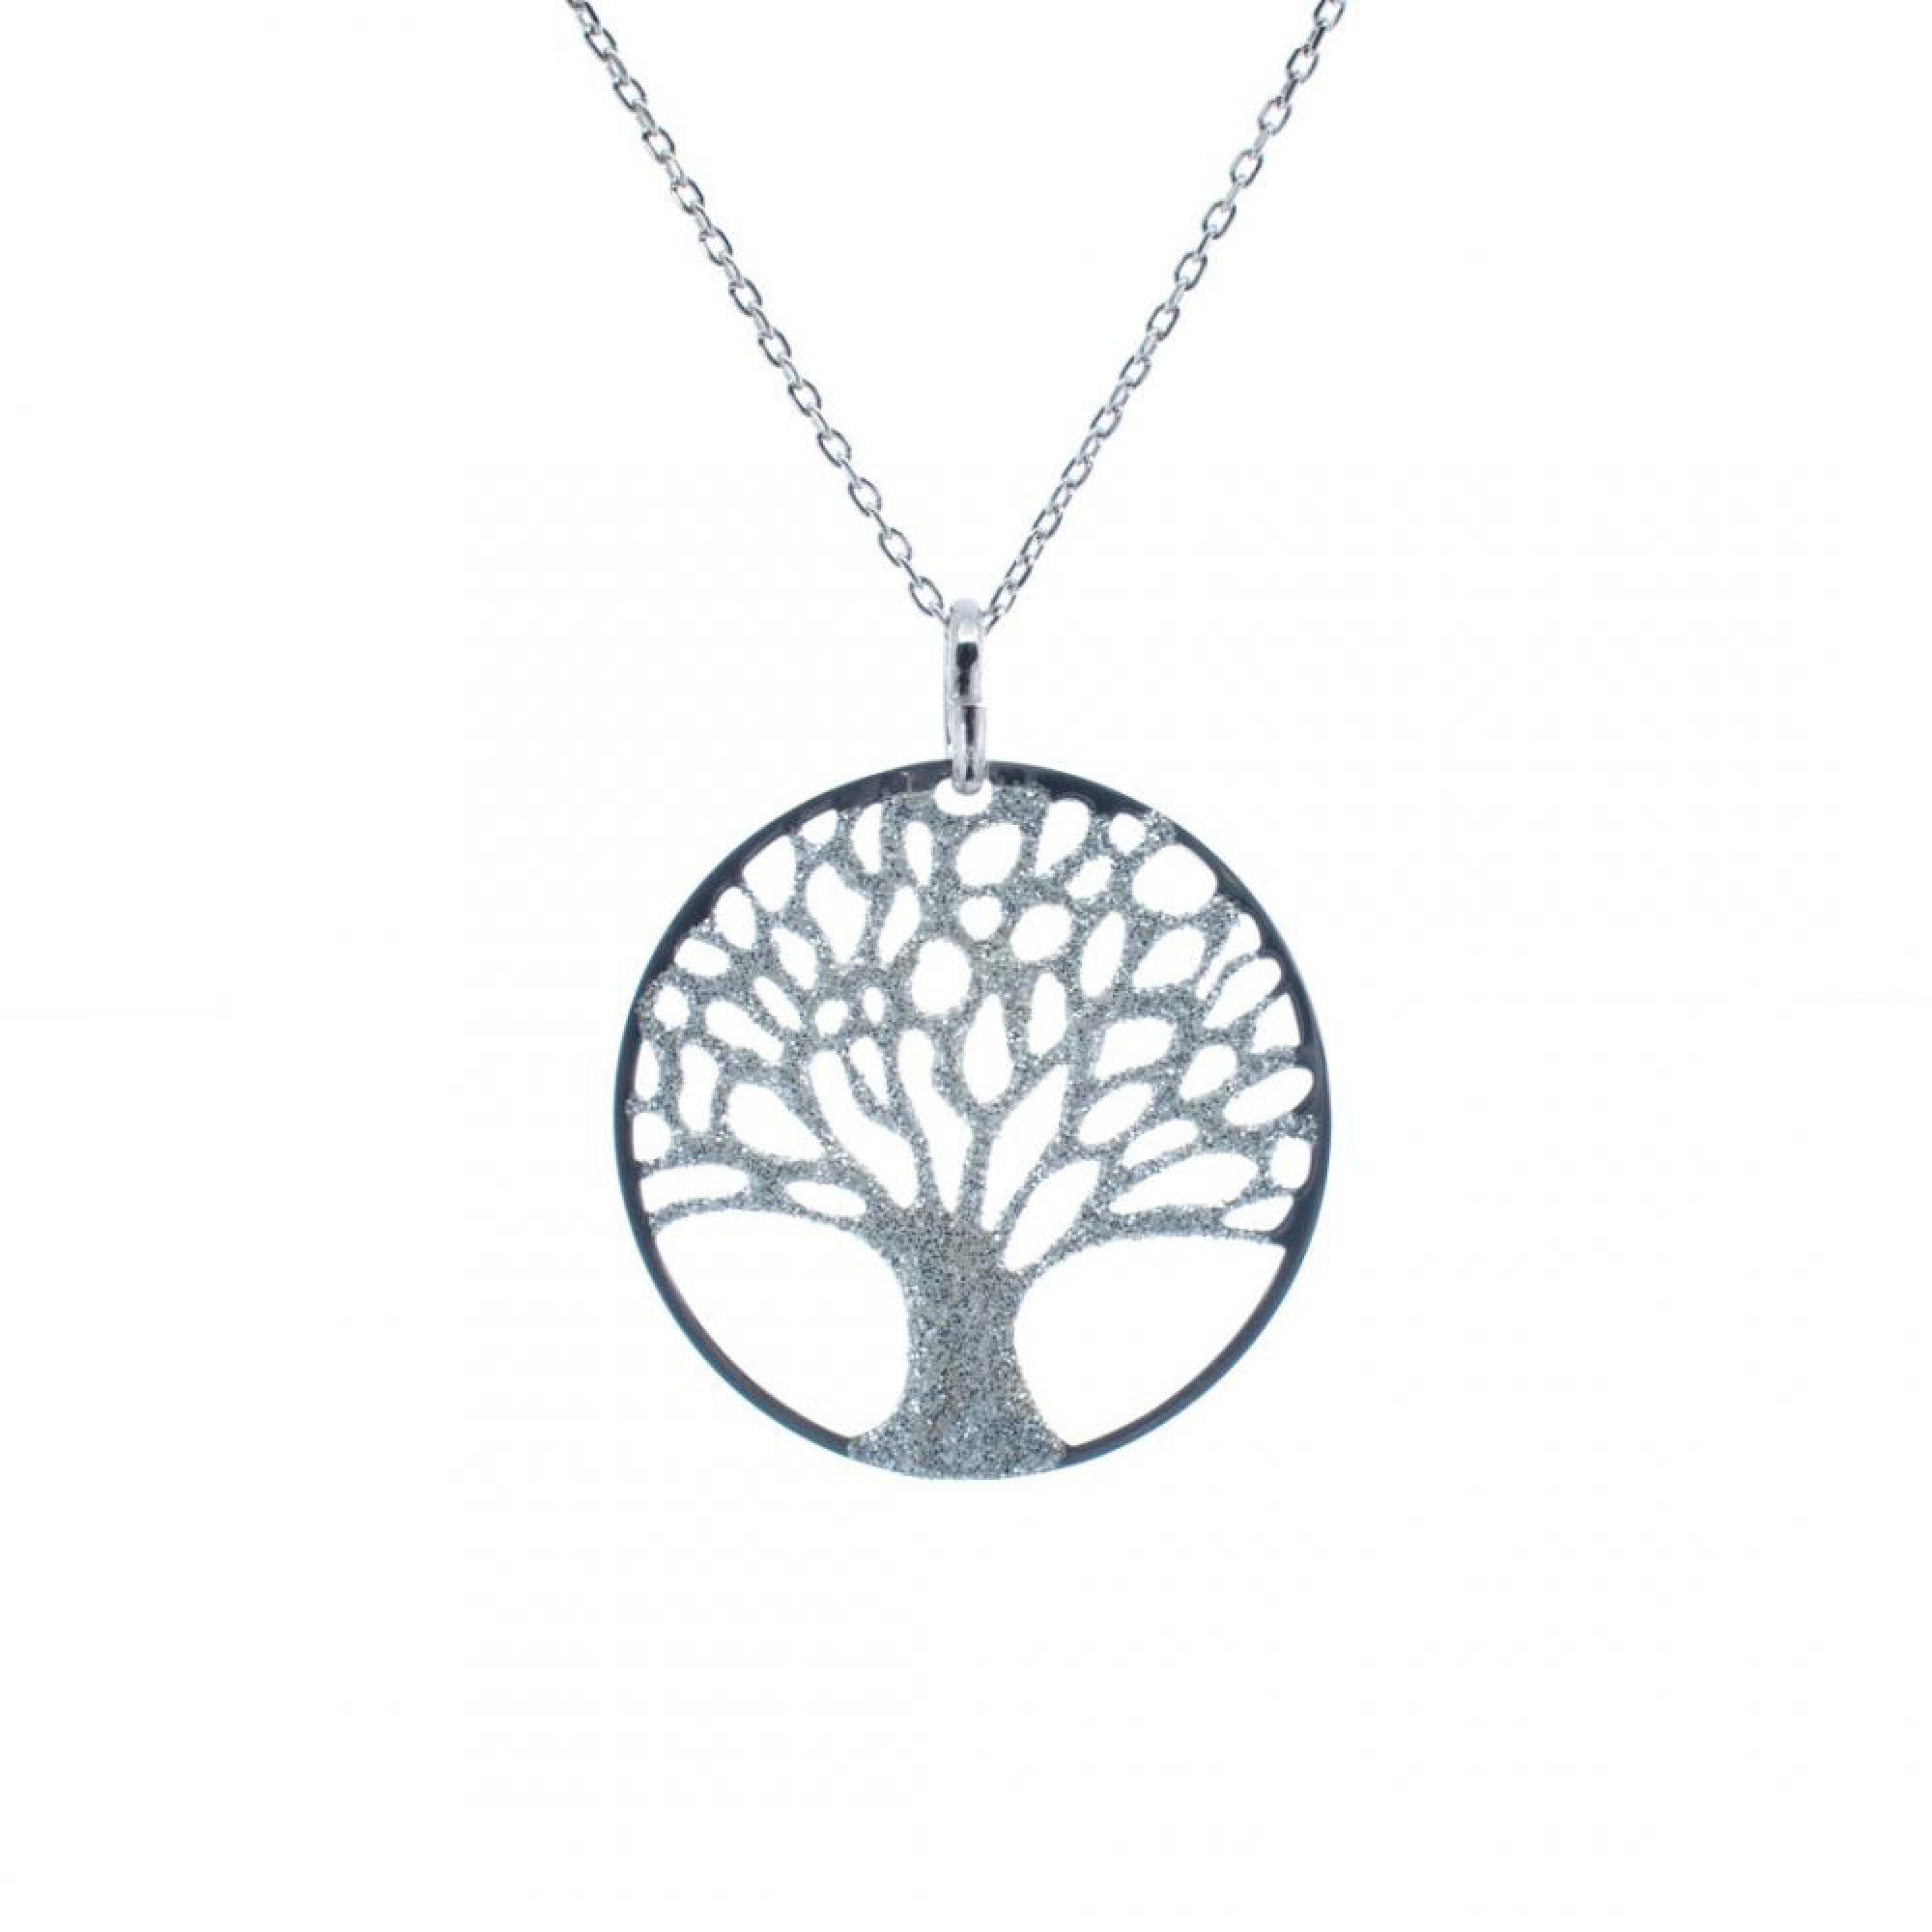 Tree of life necklace with glitter